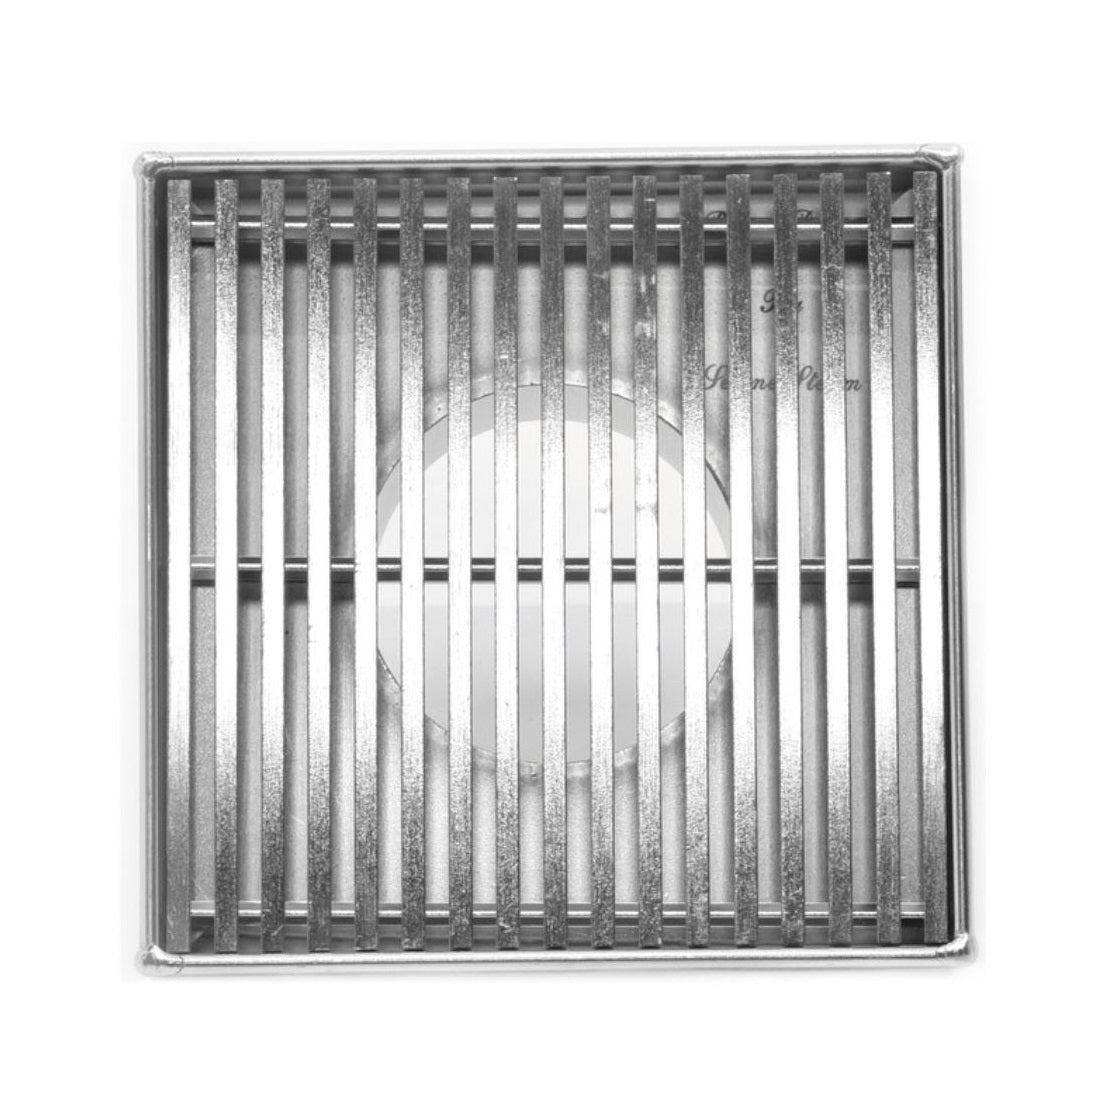 SereneDrains 4 inch Square Shower Drain Wedge Design Polished Chrome